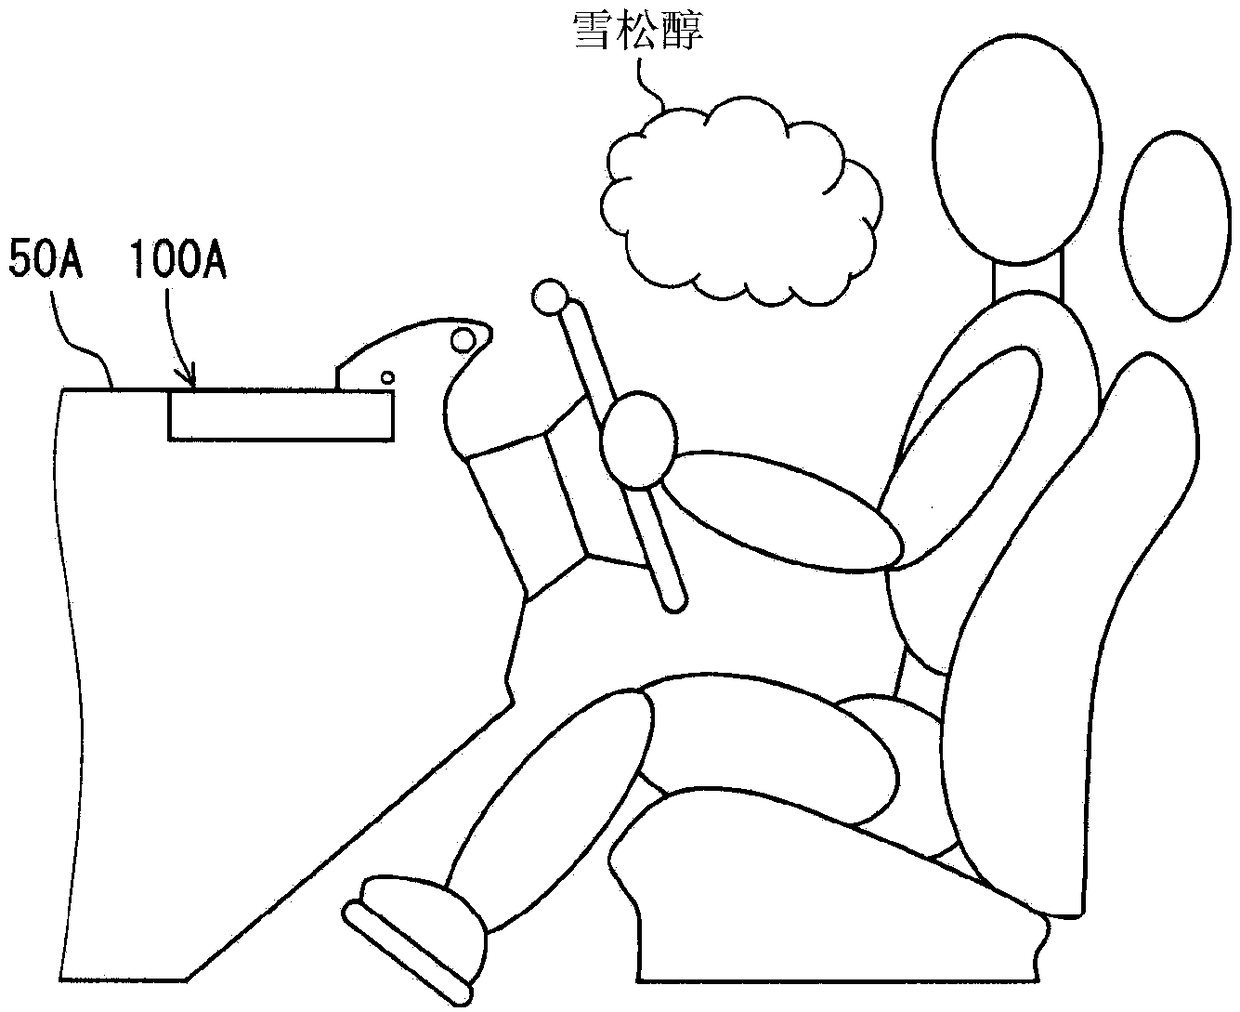 Stress relieving device for vehicle